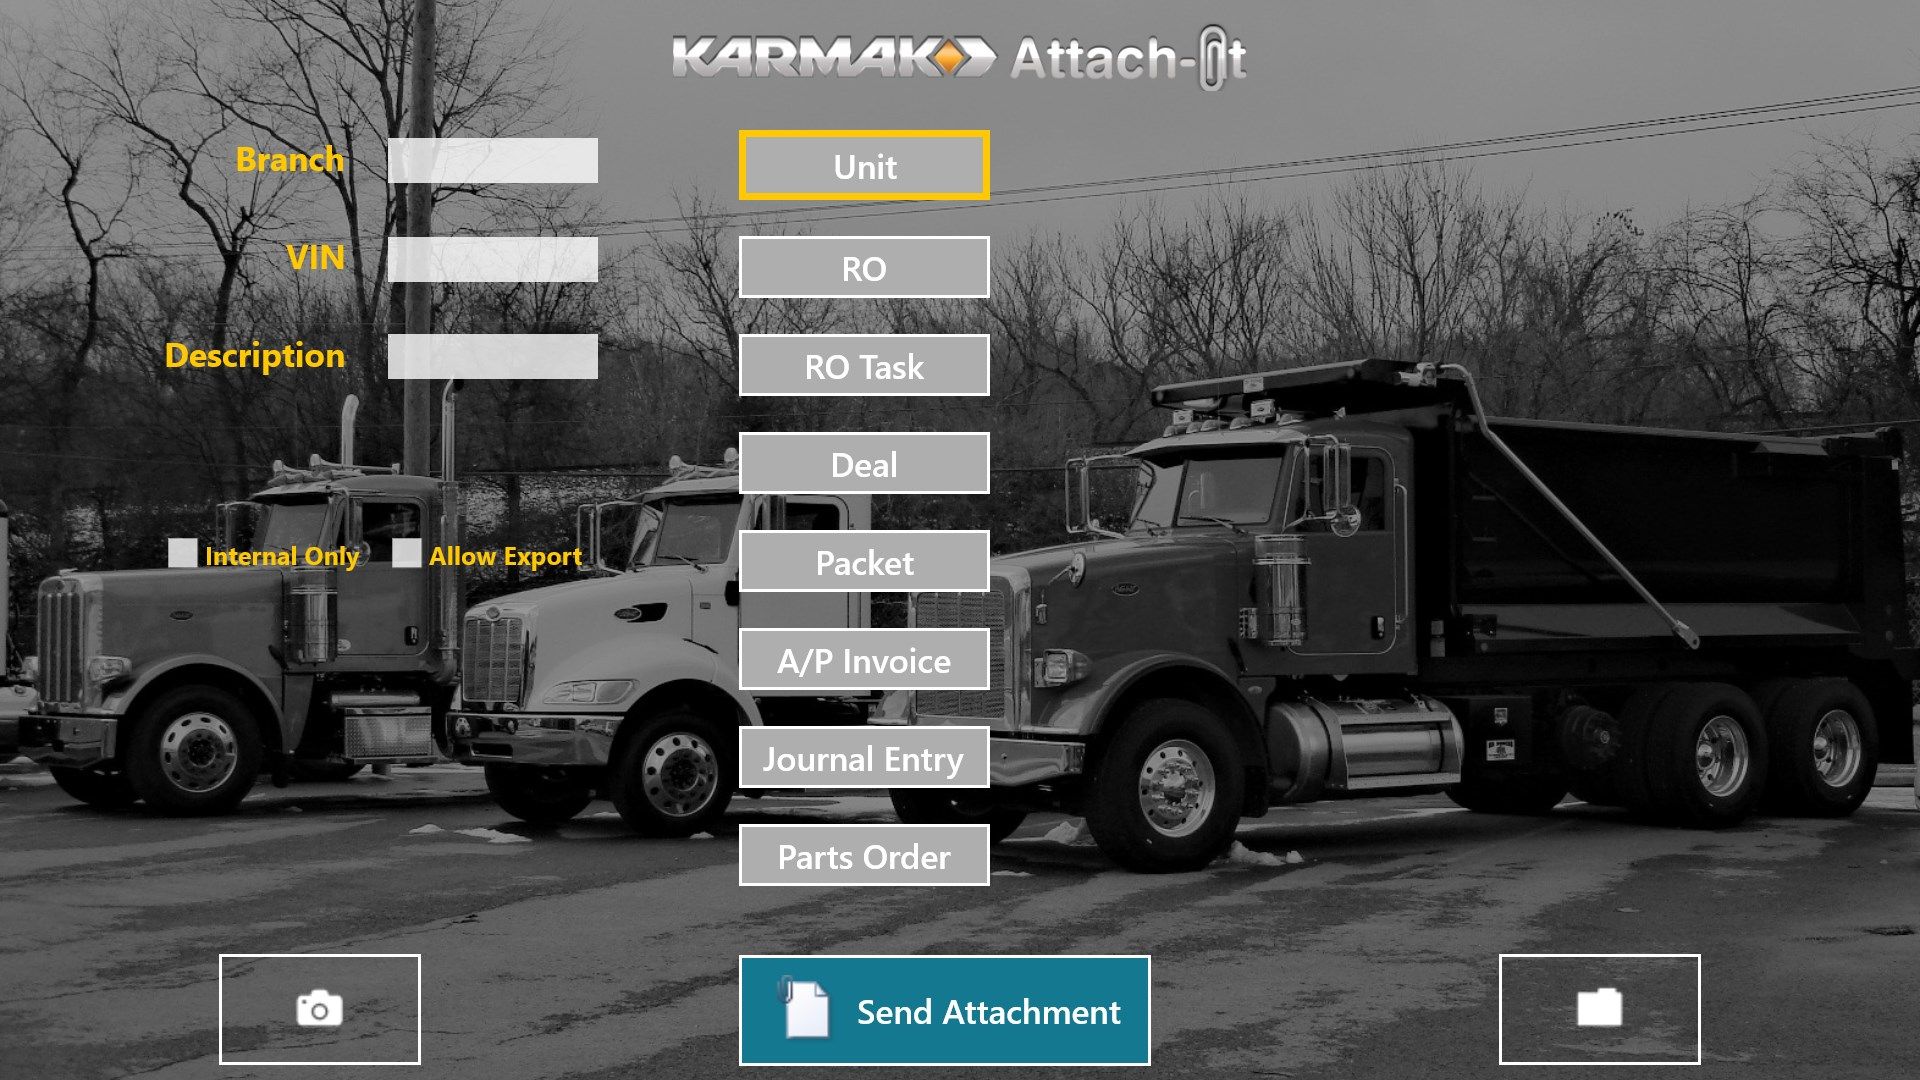 Karmak Attach-It with new features